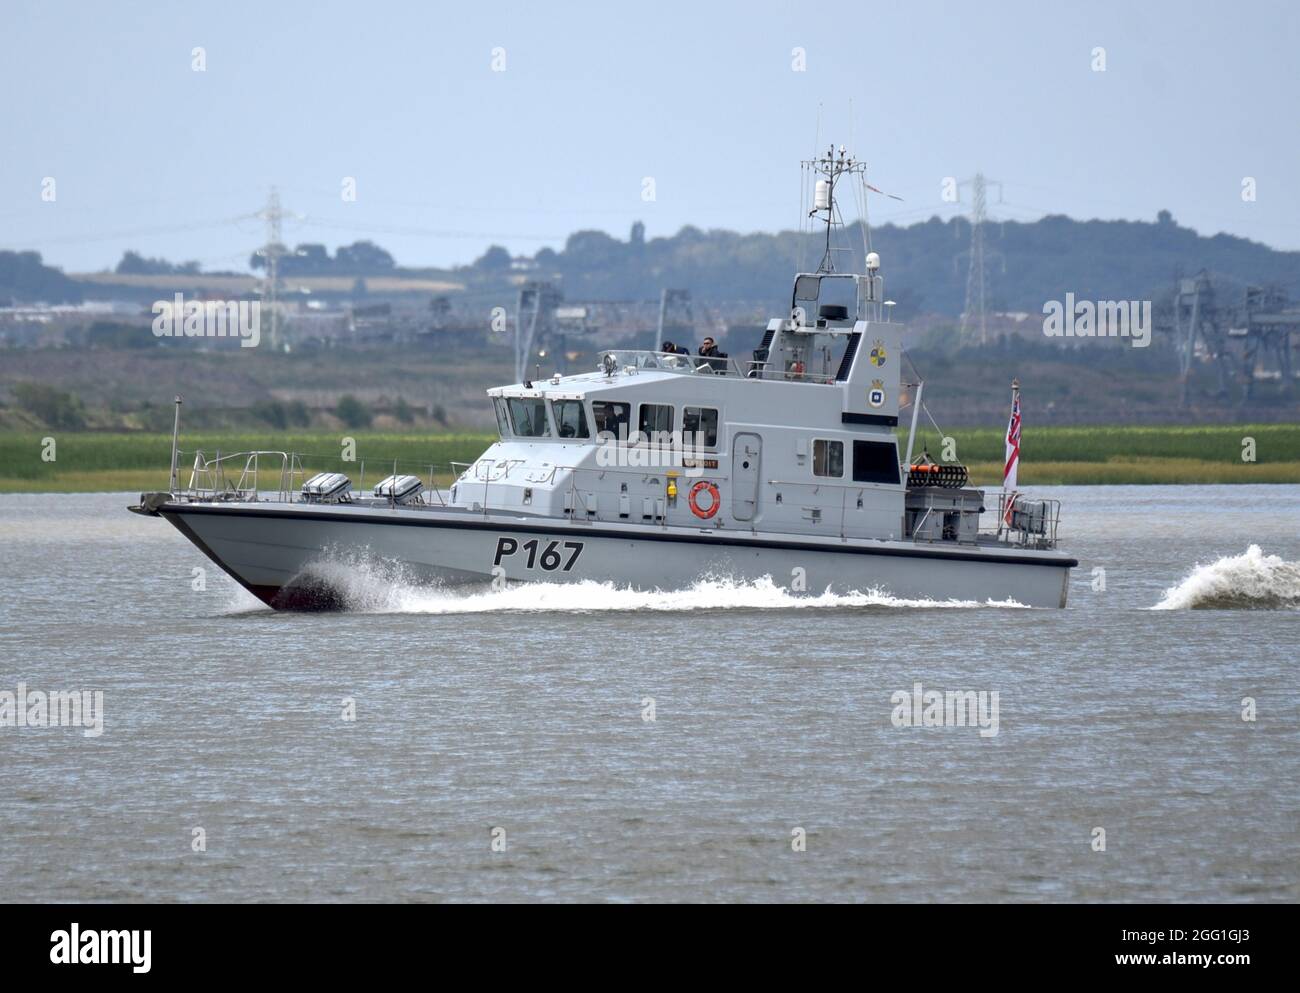 27/08/2021. Gravesend. HMS Exploit (P167) a Royal Navy Archer-Class patrol Boat setting the pace in Gravesend Reach. Stock Photo